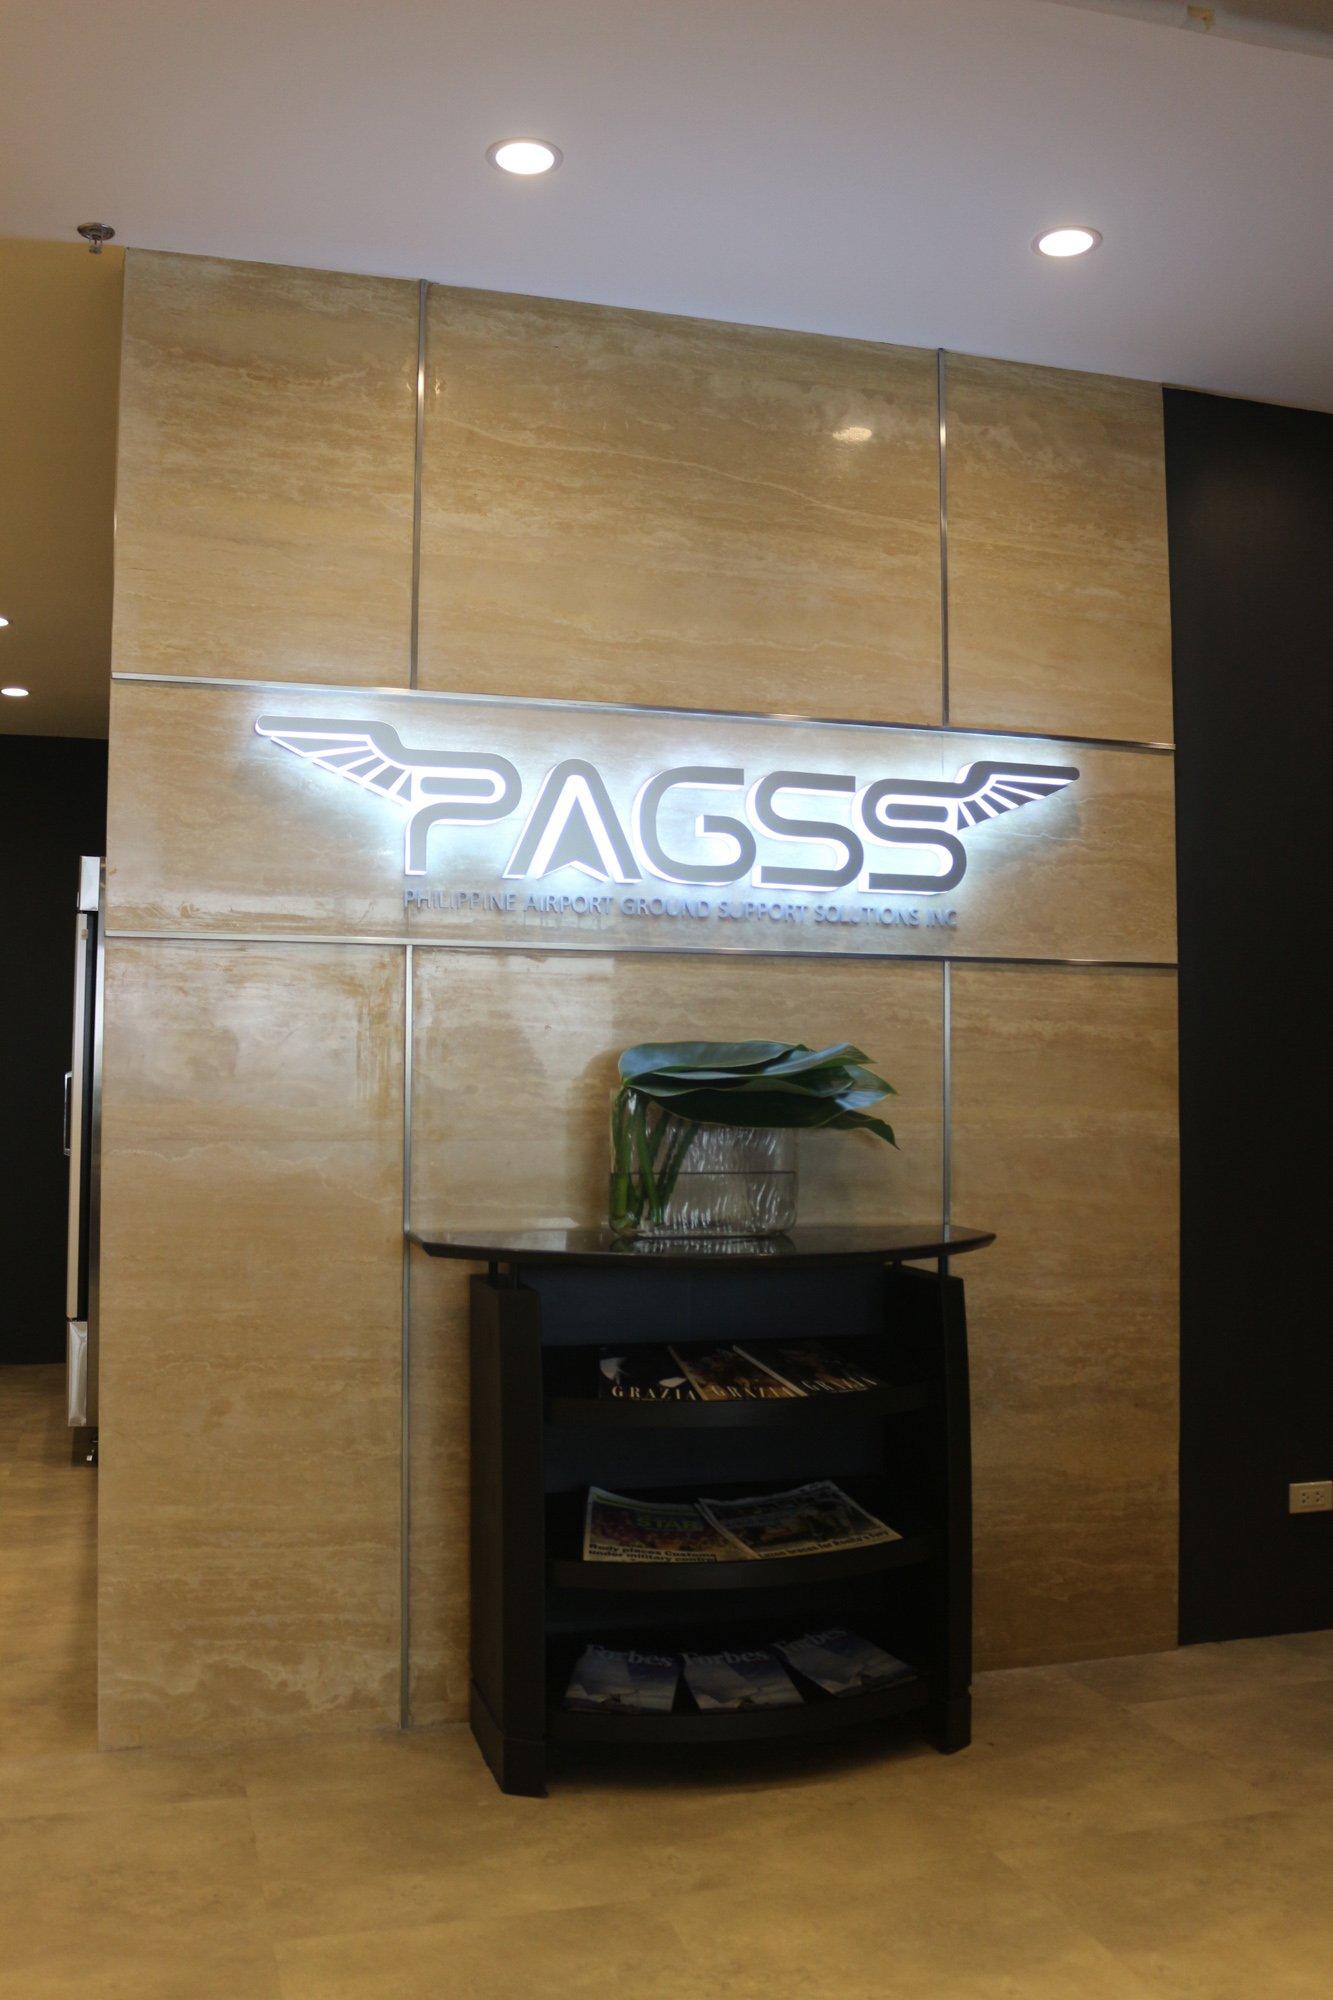 PAGSS Lounge (Gate 7) image 34 of 41